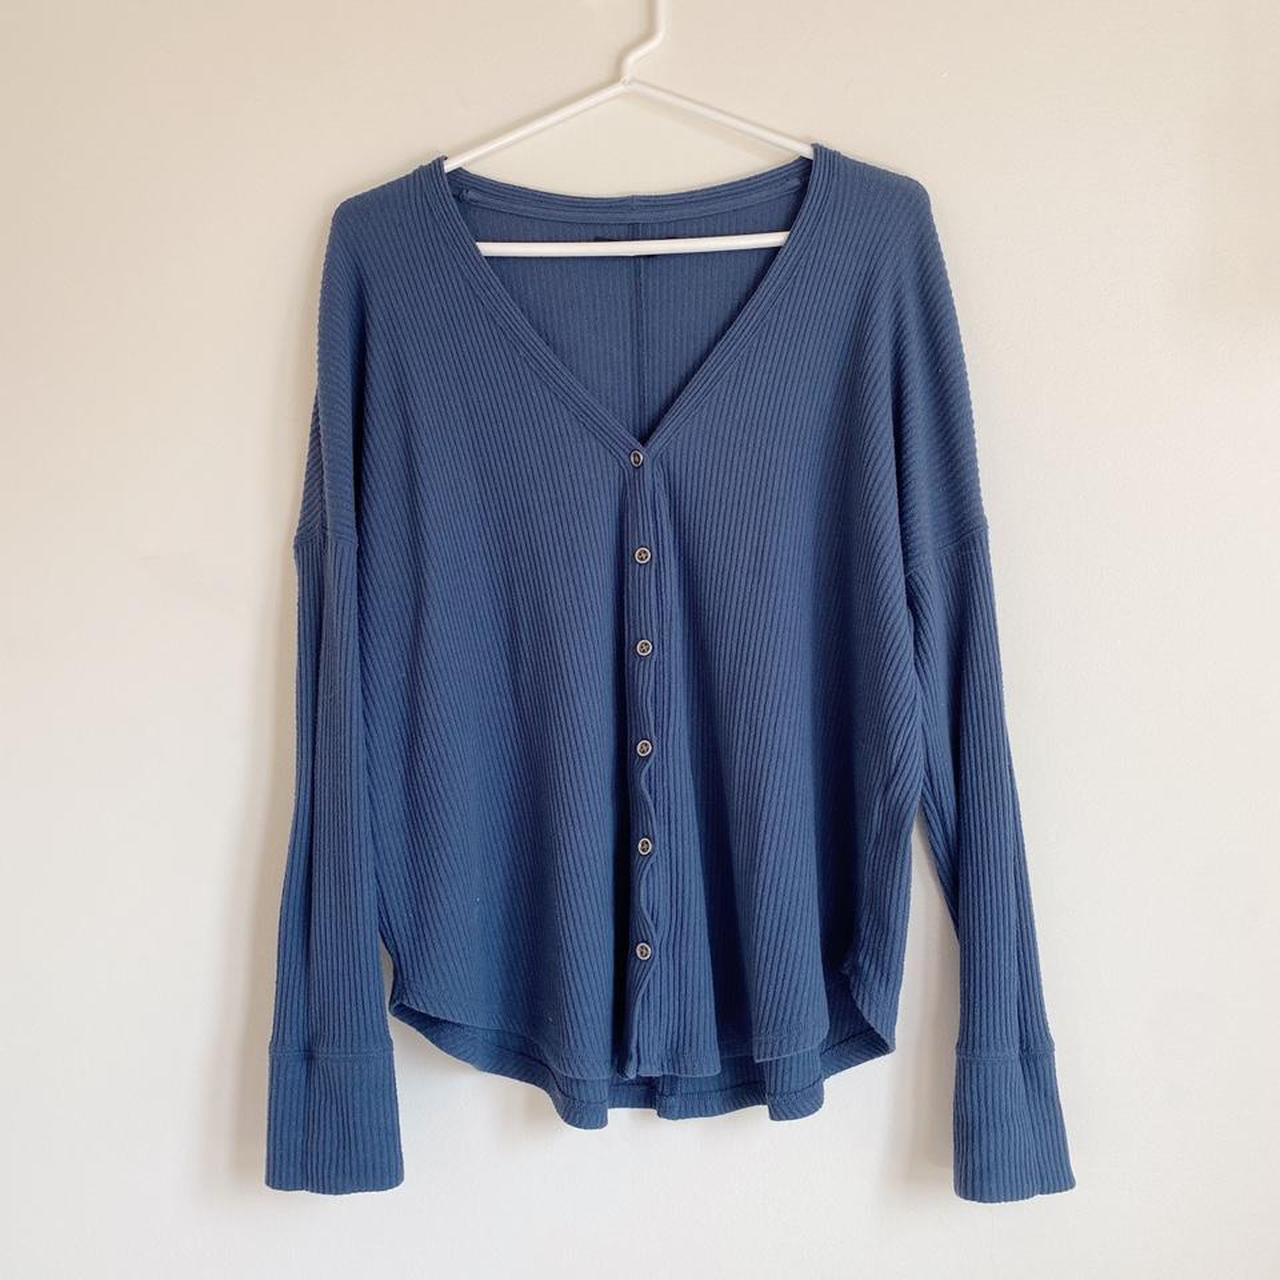 Product Image 1 - Blue button up sweater. Super